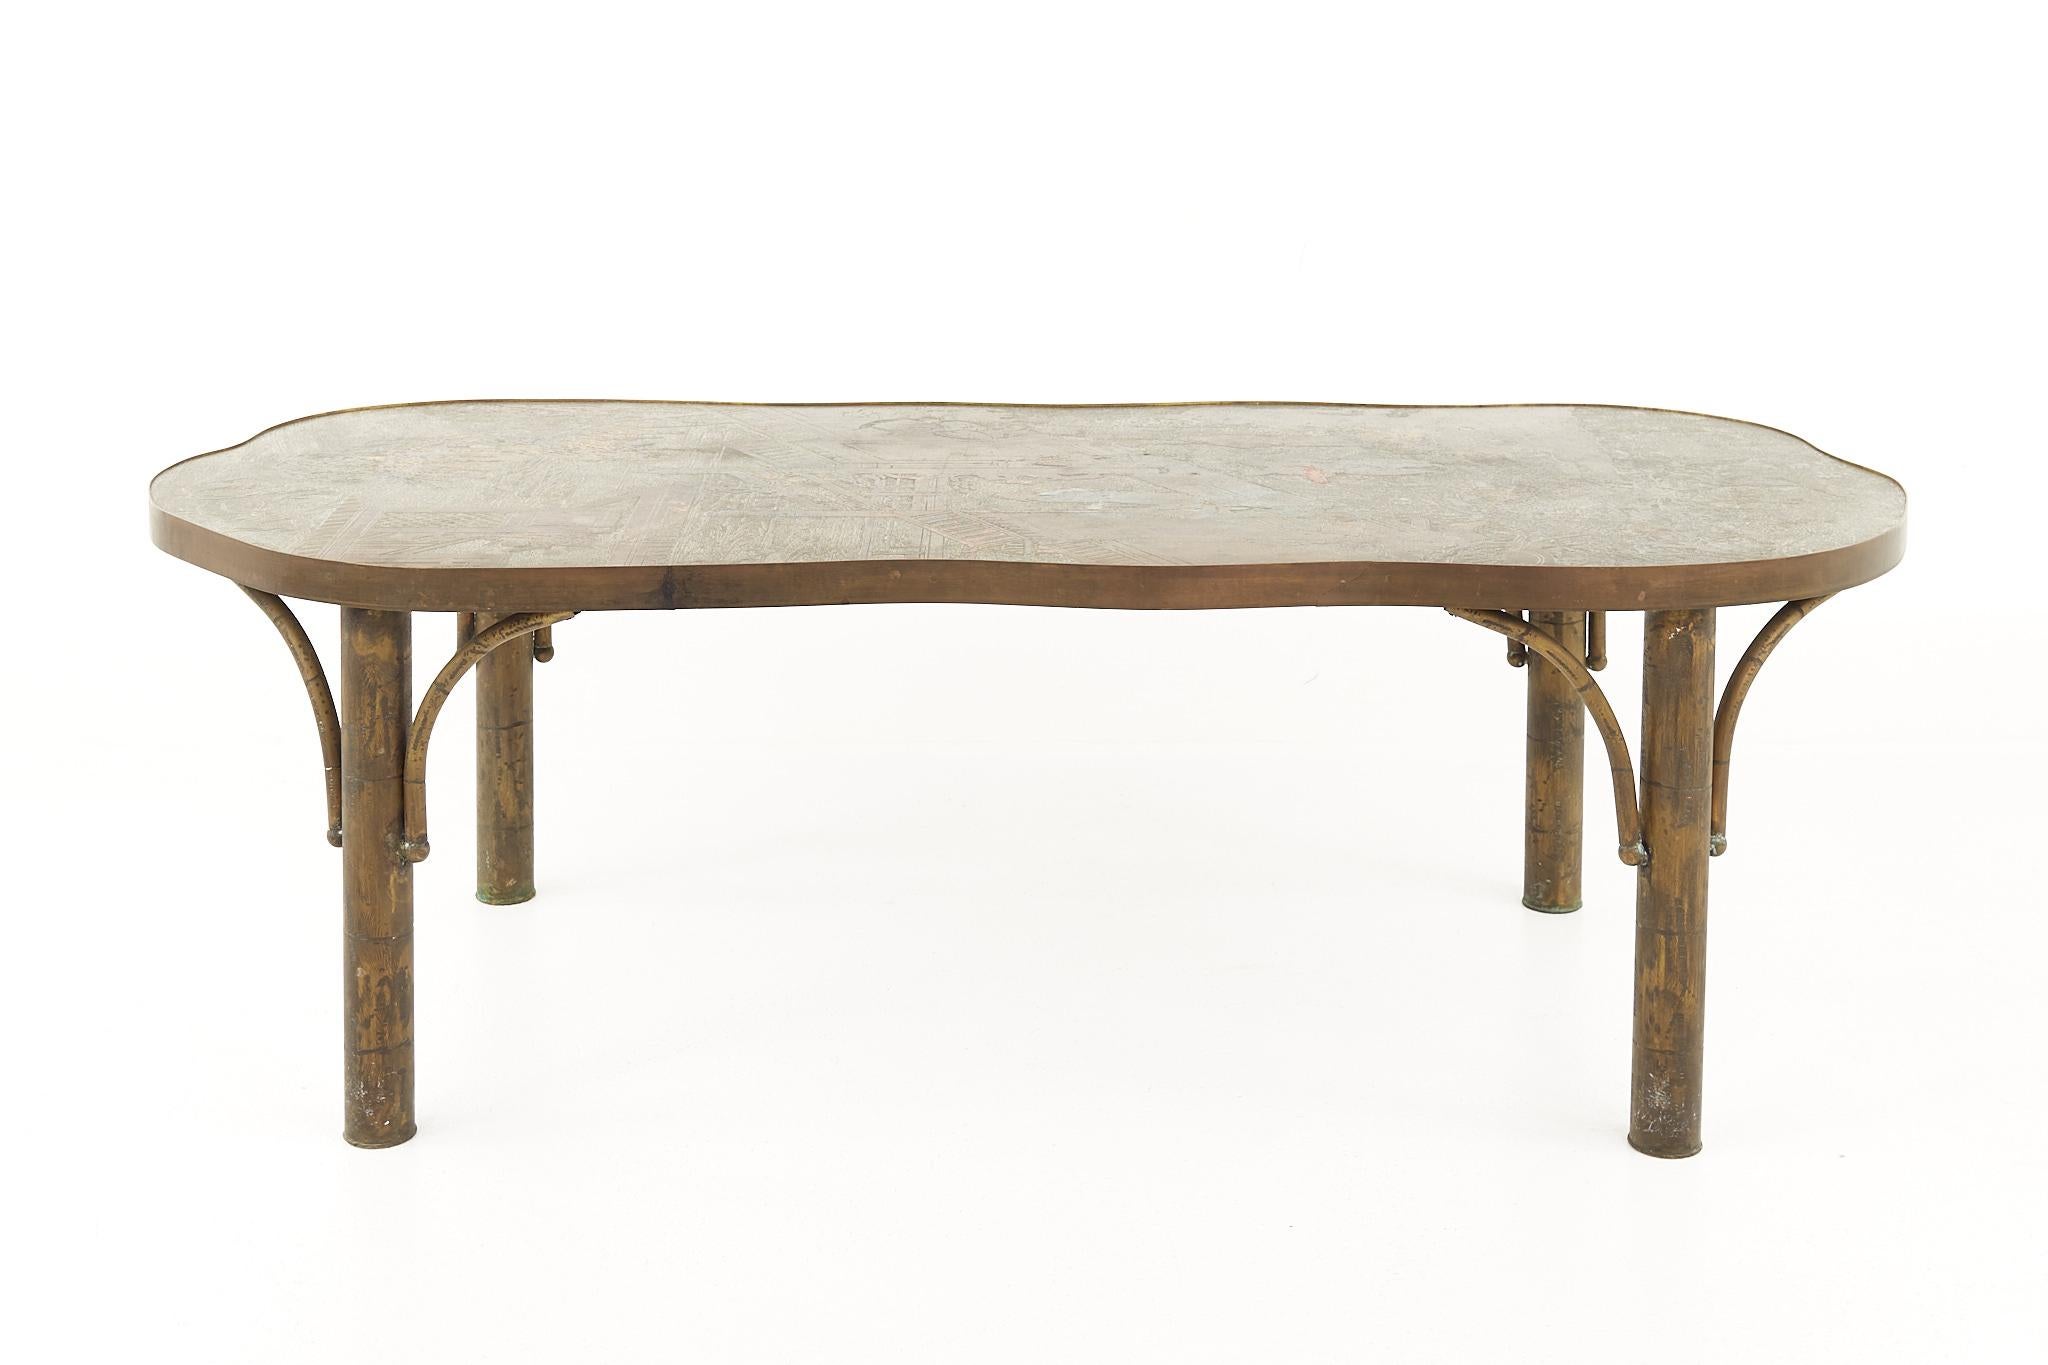 Philip & Kelvin LaVerne Chan 140 mid century pewter and bronze coffee table

This table measures: 54 wide x 23.5 deep x 17 inches high

All pieces of furniture can be had in what we call restored vintage condition. That means the piece is